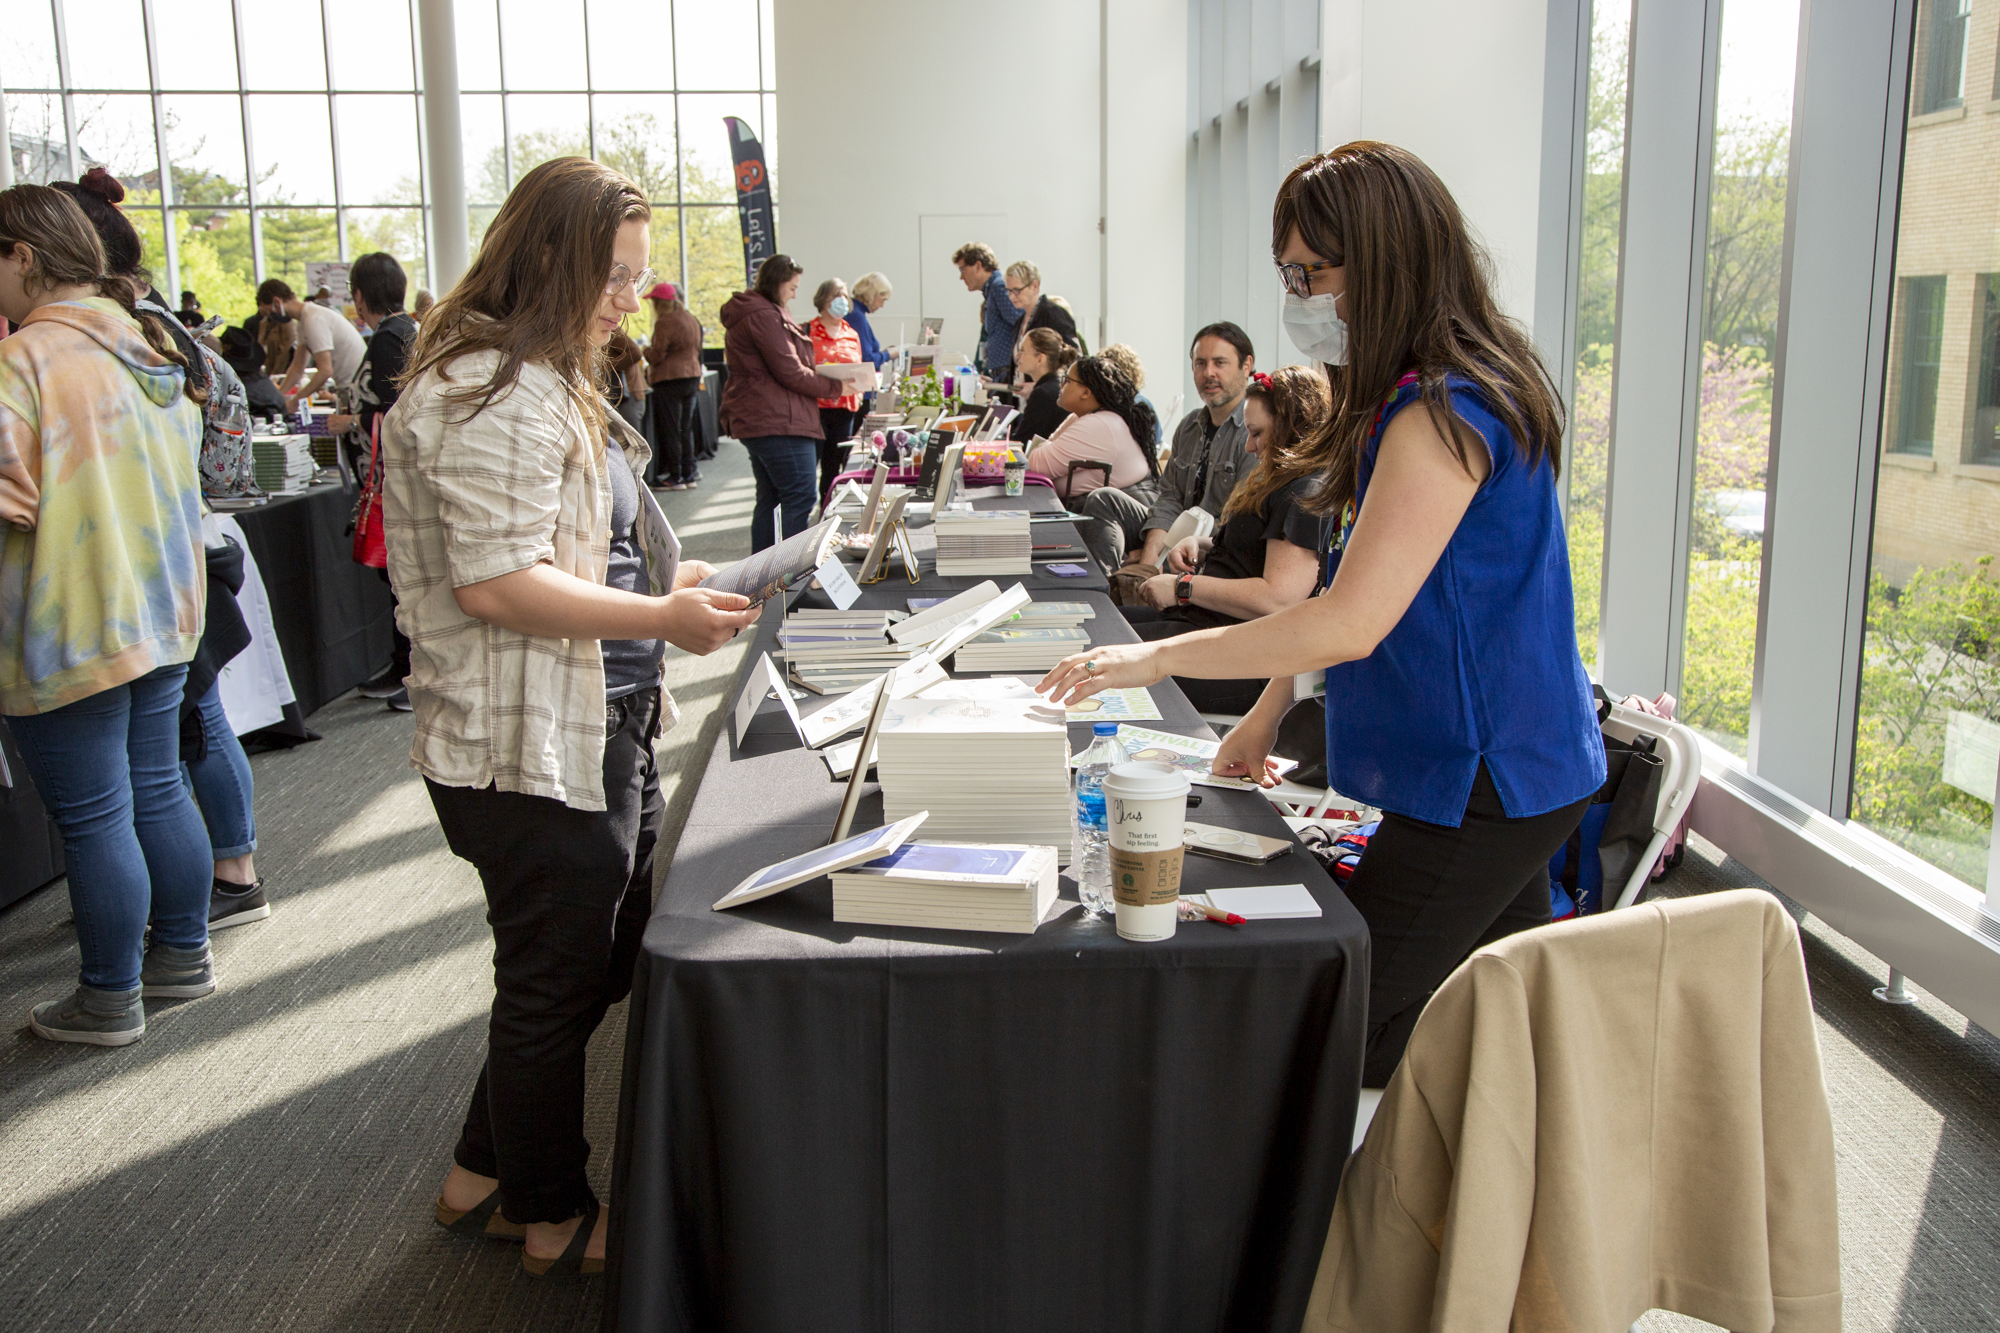 This image is from the 2023 Ohioana Book Festival. It shows Ohio Author Felicia Zamora connecting with a reader, who is looking at Zamora's various poetry books. The background includes other festival attendees.